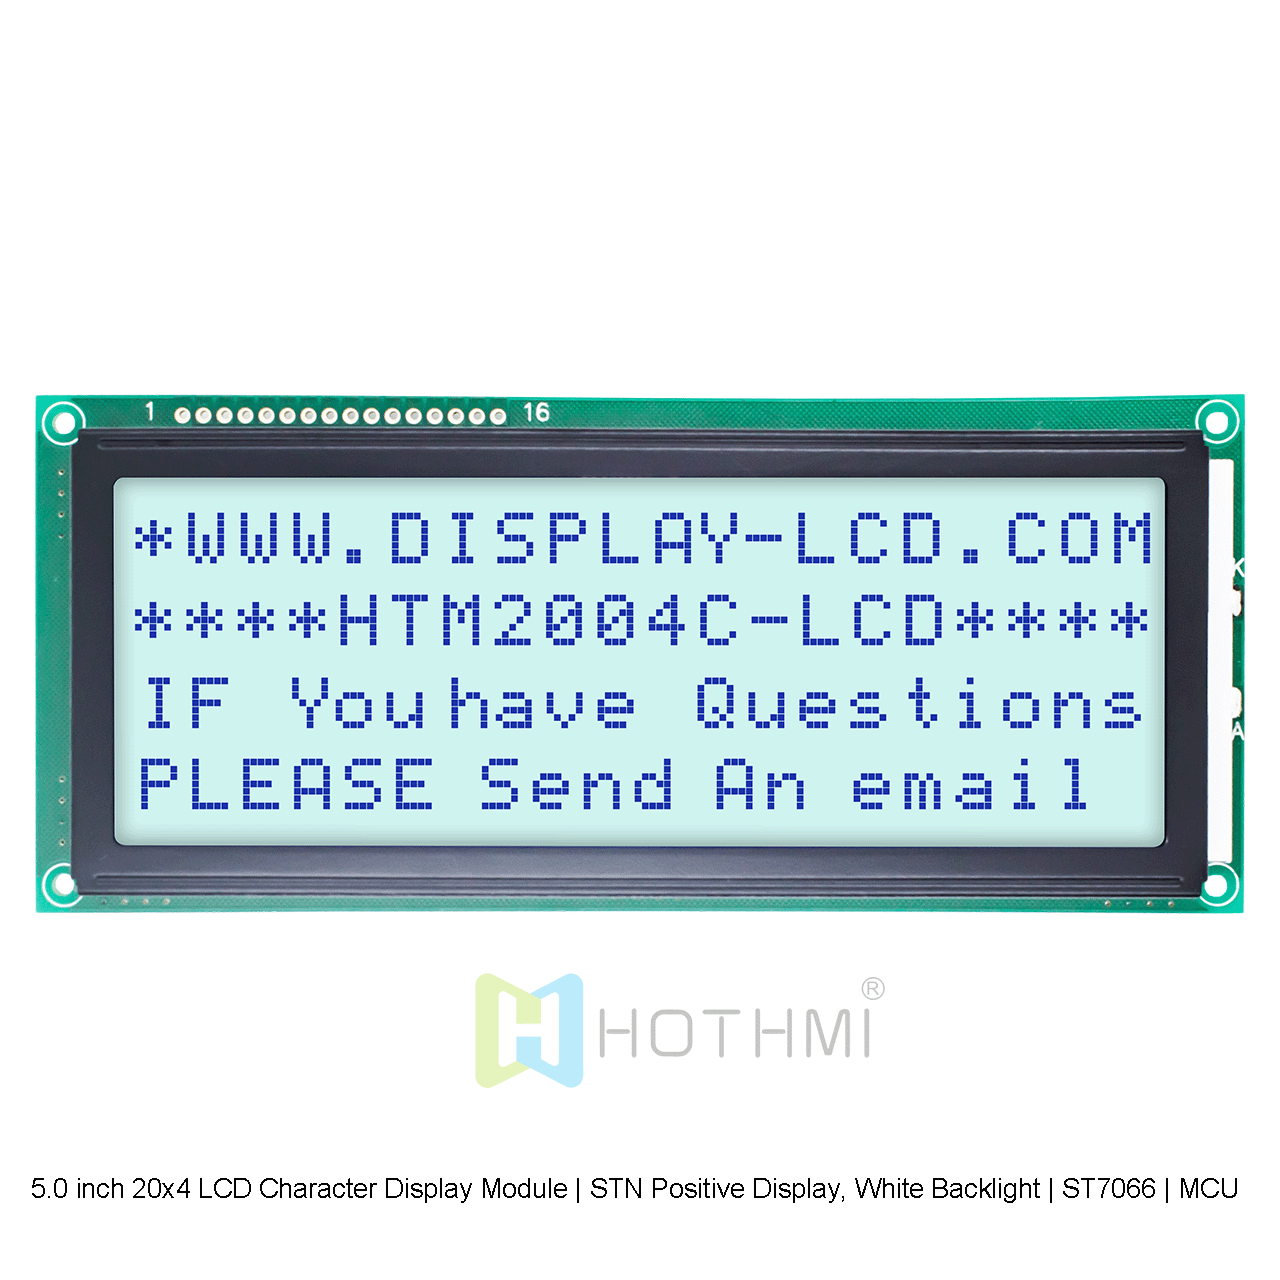 5.0 inch 20x4 LCD Character Display Module | STN Positive Display, White Backlight | ST7066 | MCU Interface | Gray Background with Blue Characters | For Adruino